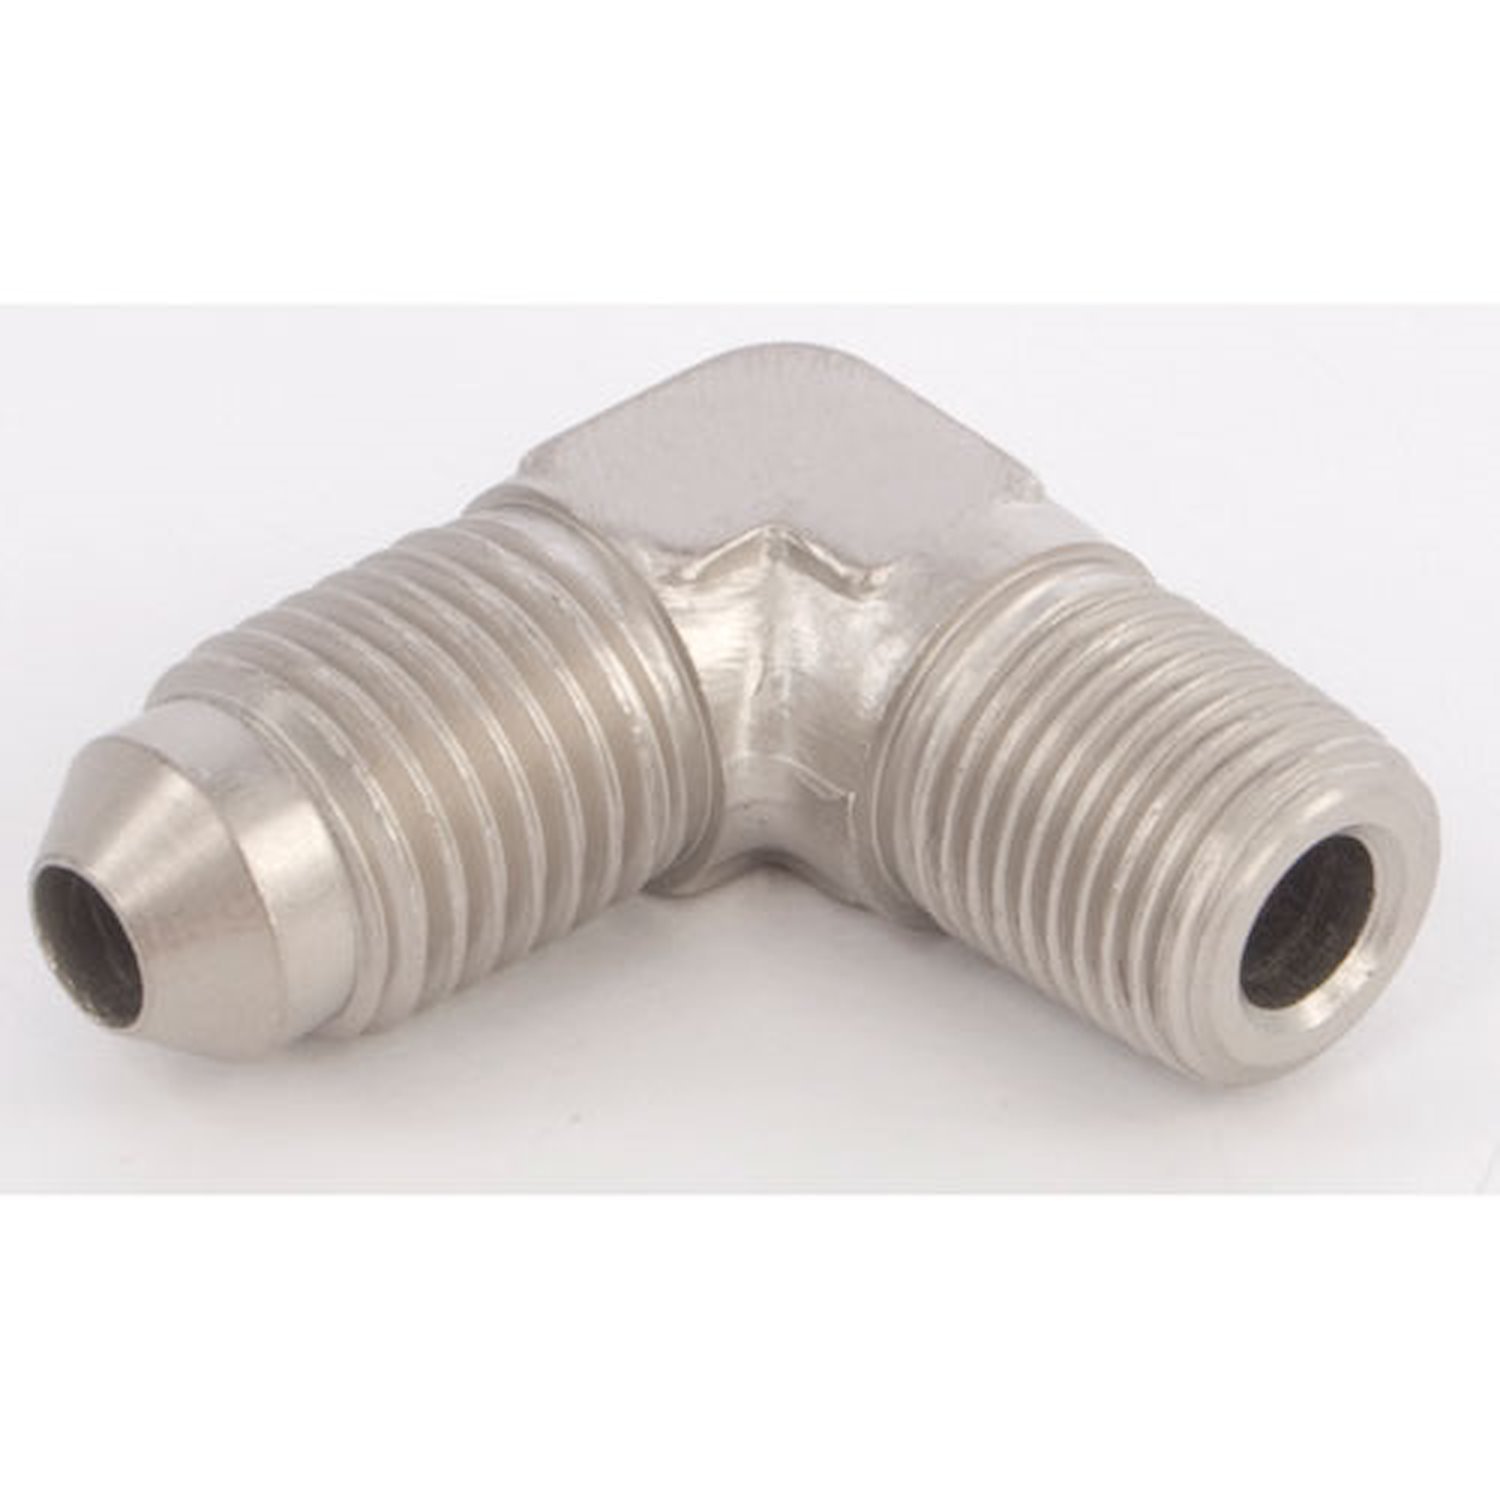 Nickel 90 degree Flare Fitting [1/8 in. NPT